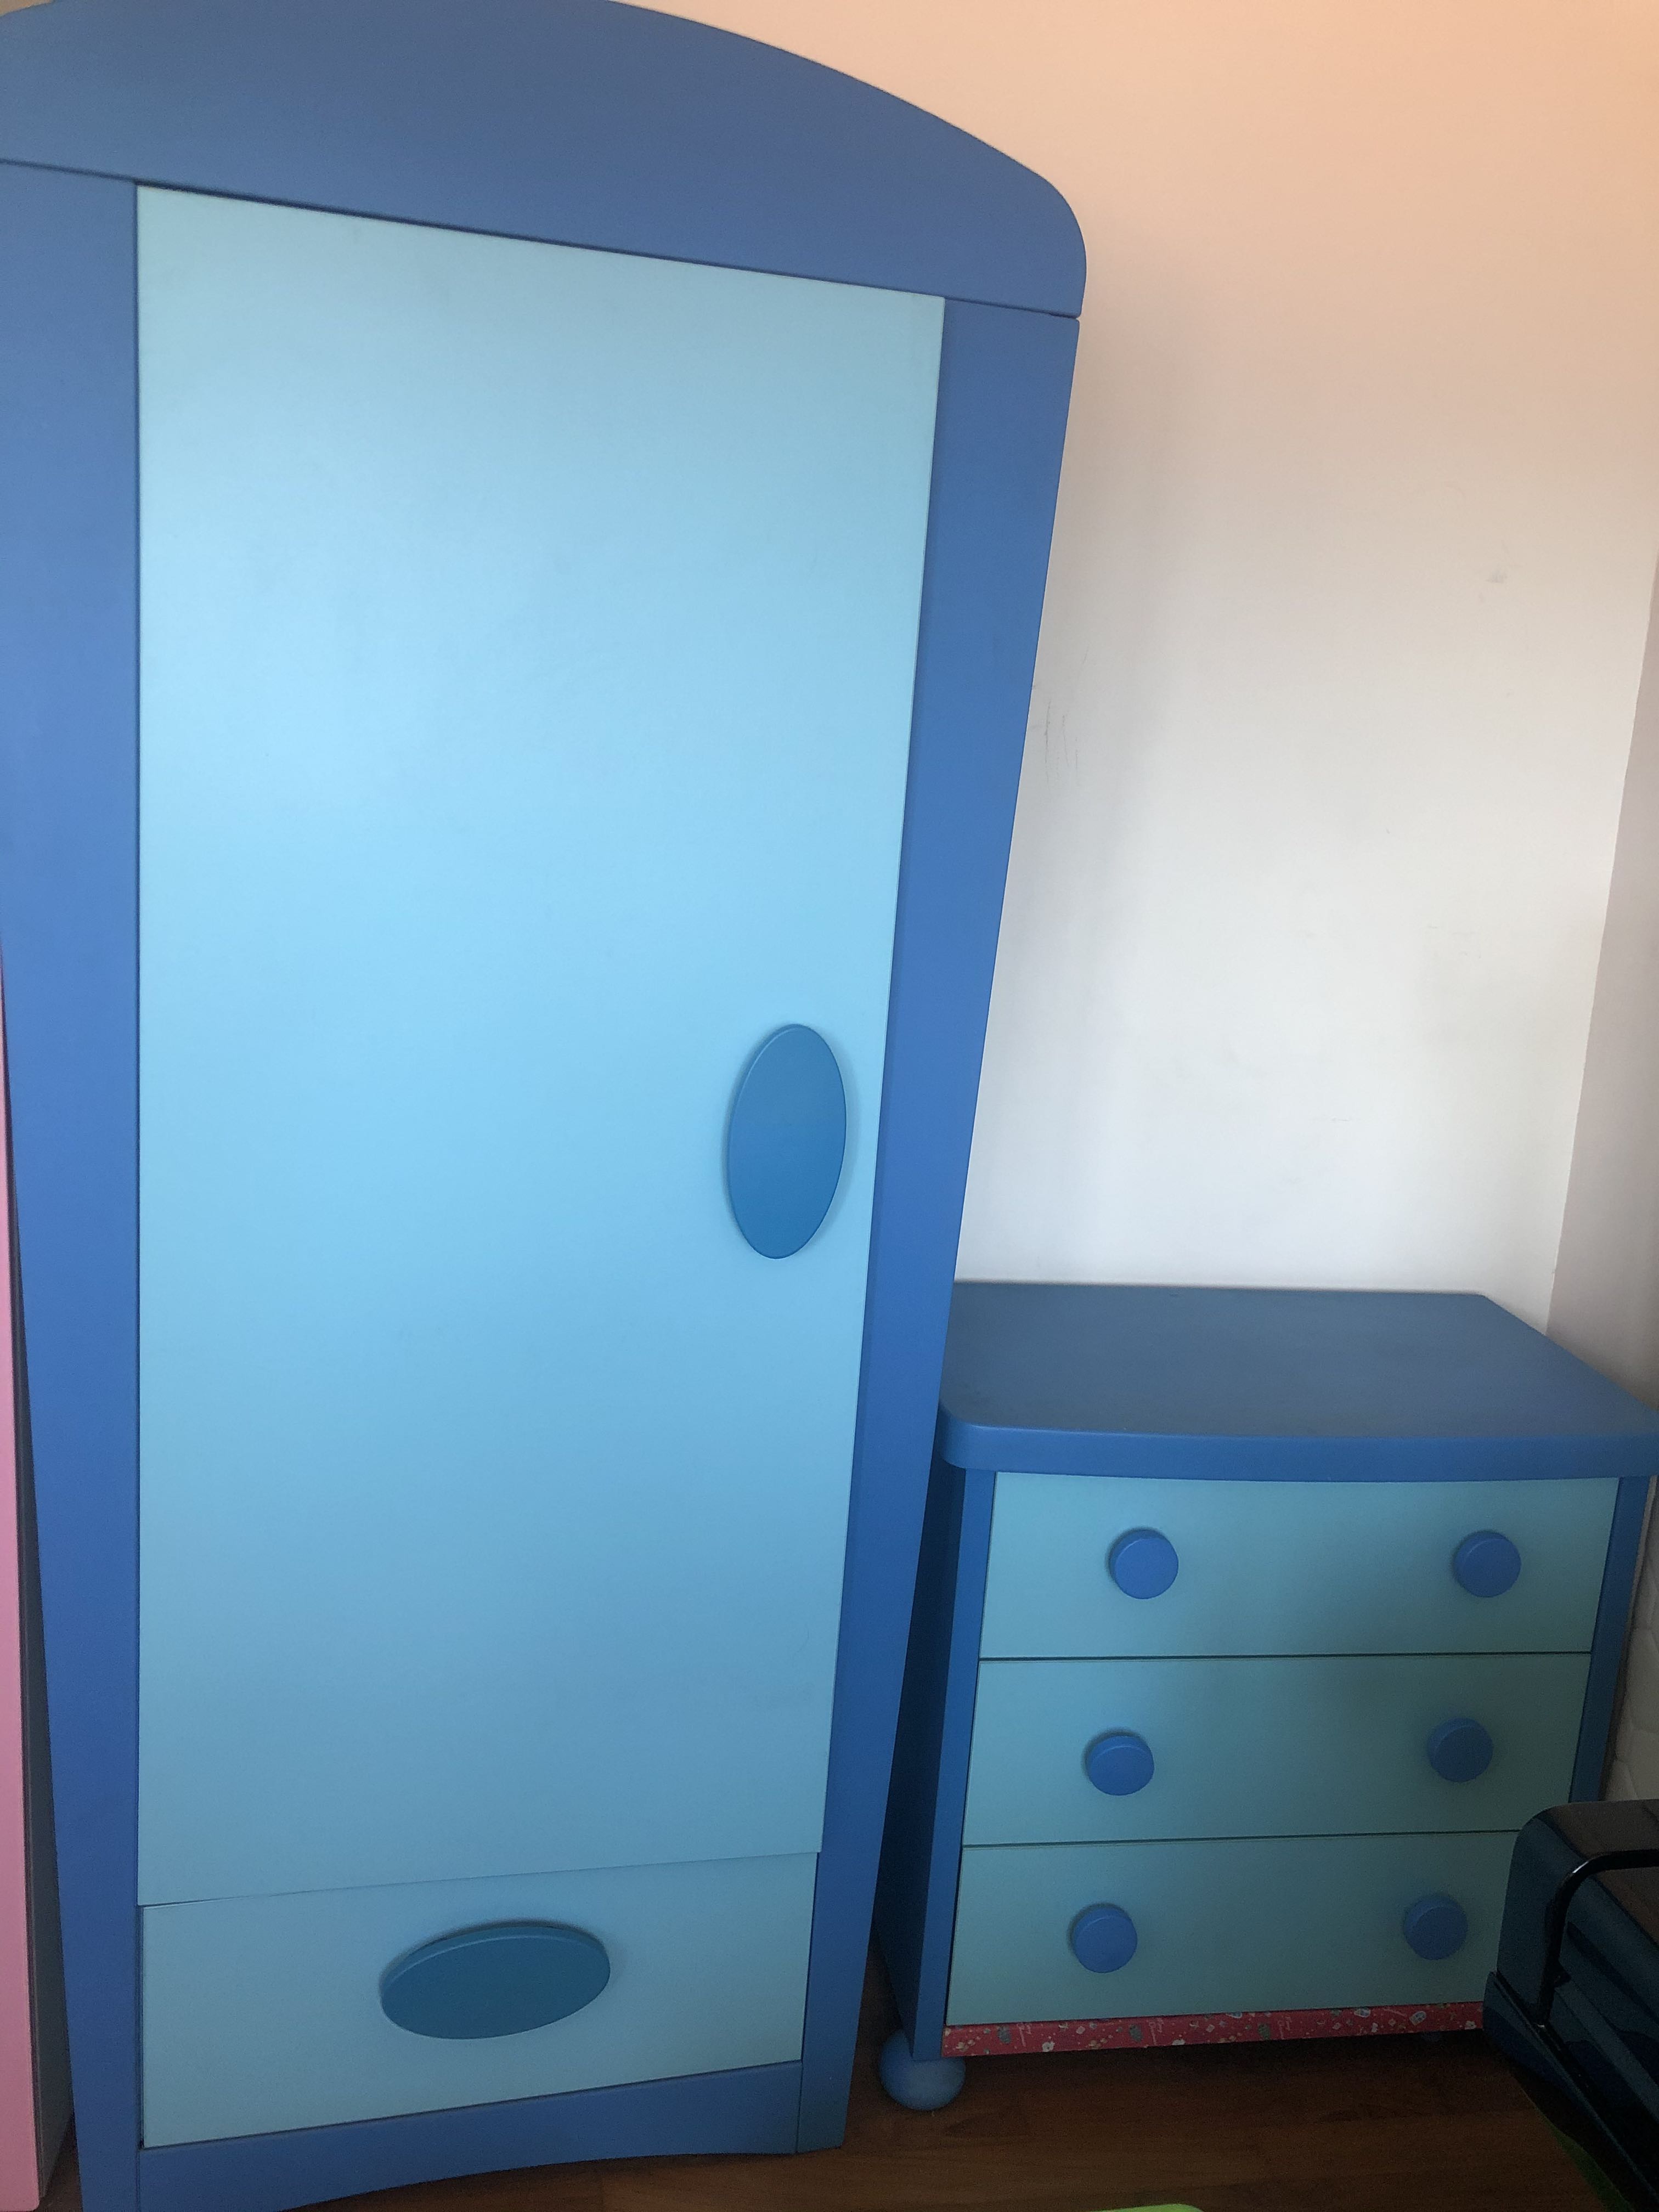 kids wardrobe and chest of drawers